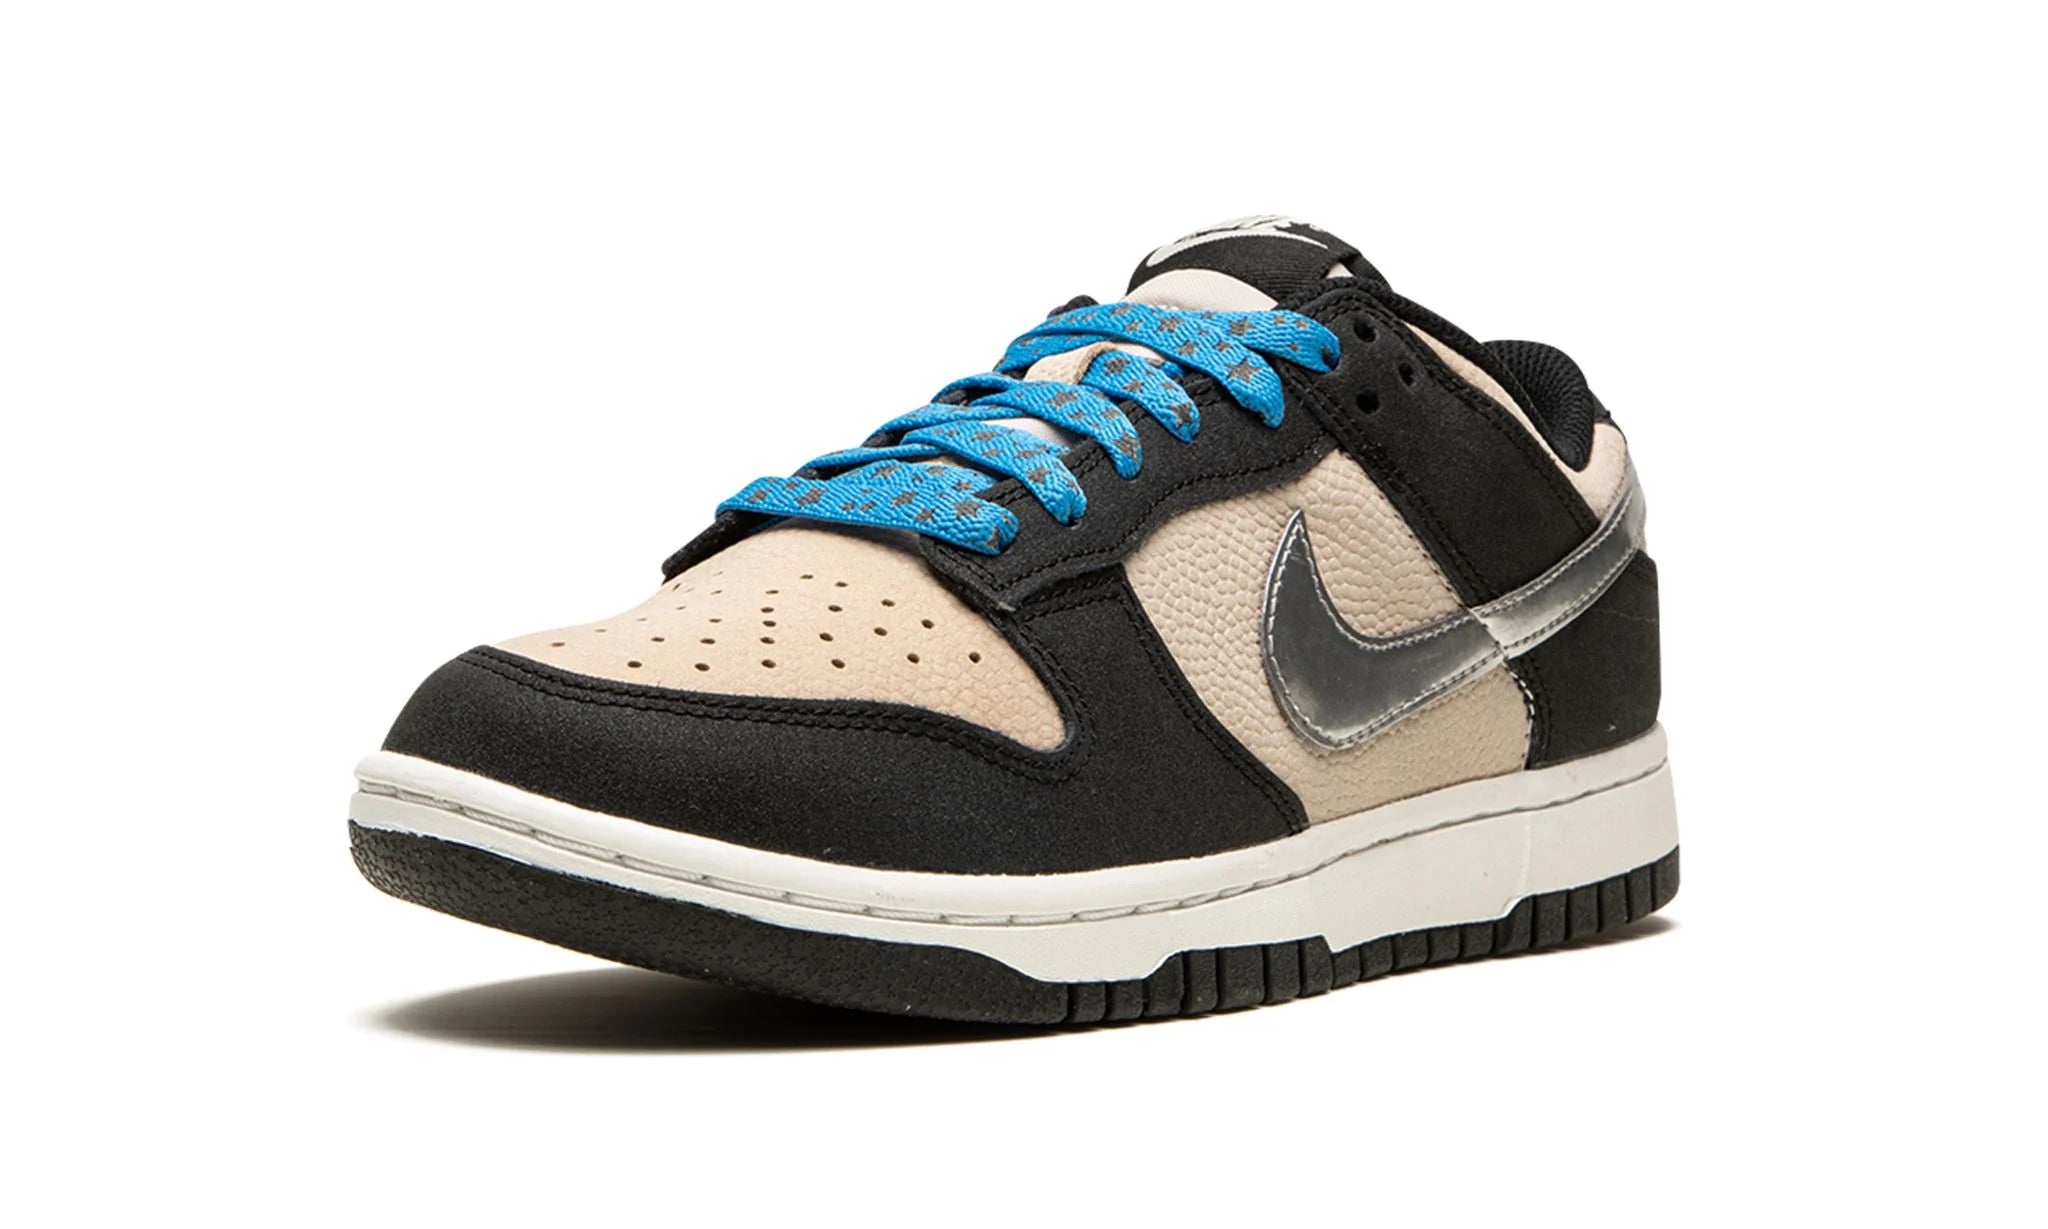 Nike Dunk Low "Starry Laces"